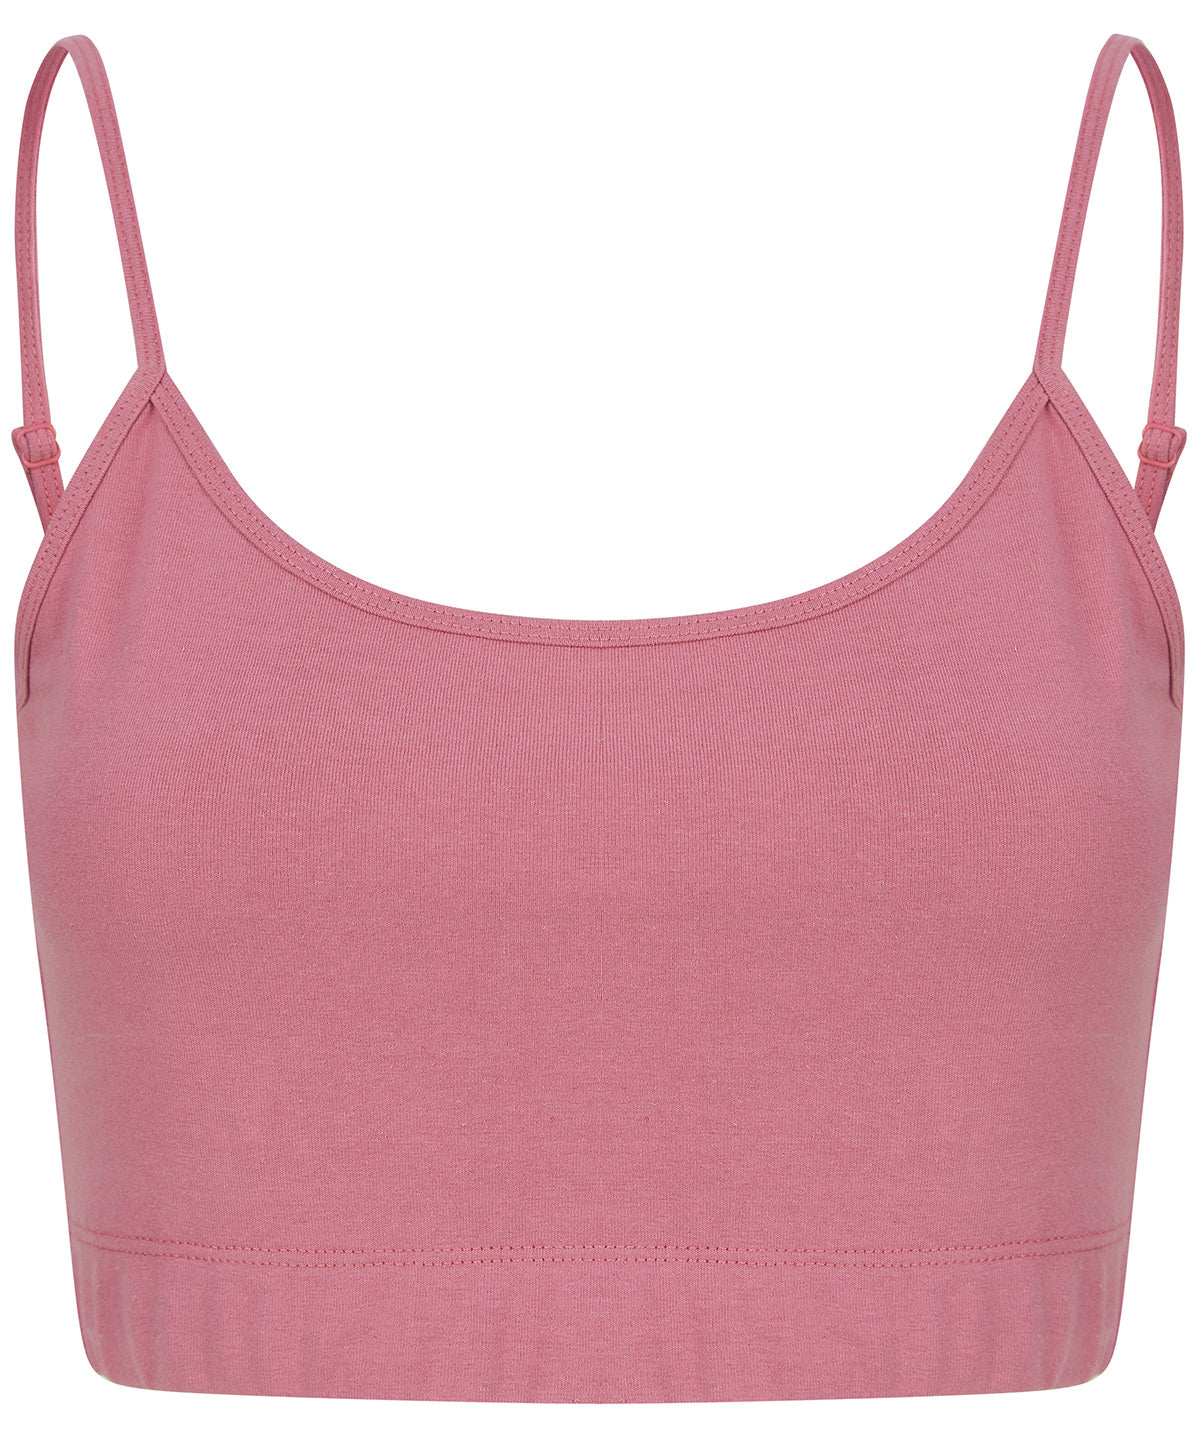 Stuttermabolir - Women's Sustainable Fashion Cropped Cami Top With Adjustable Straps